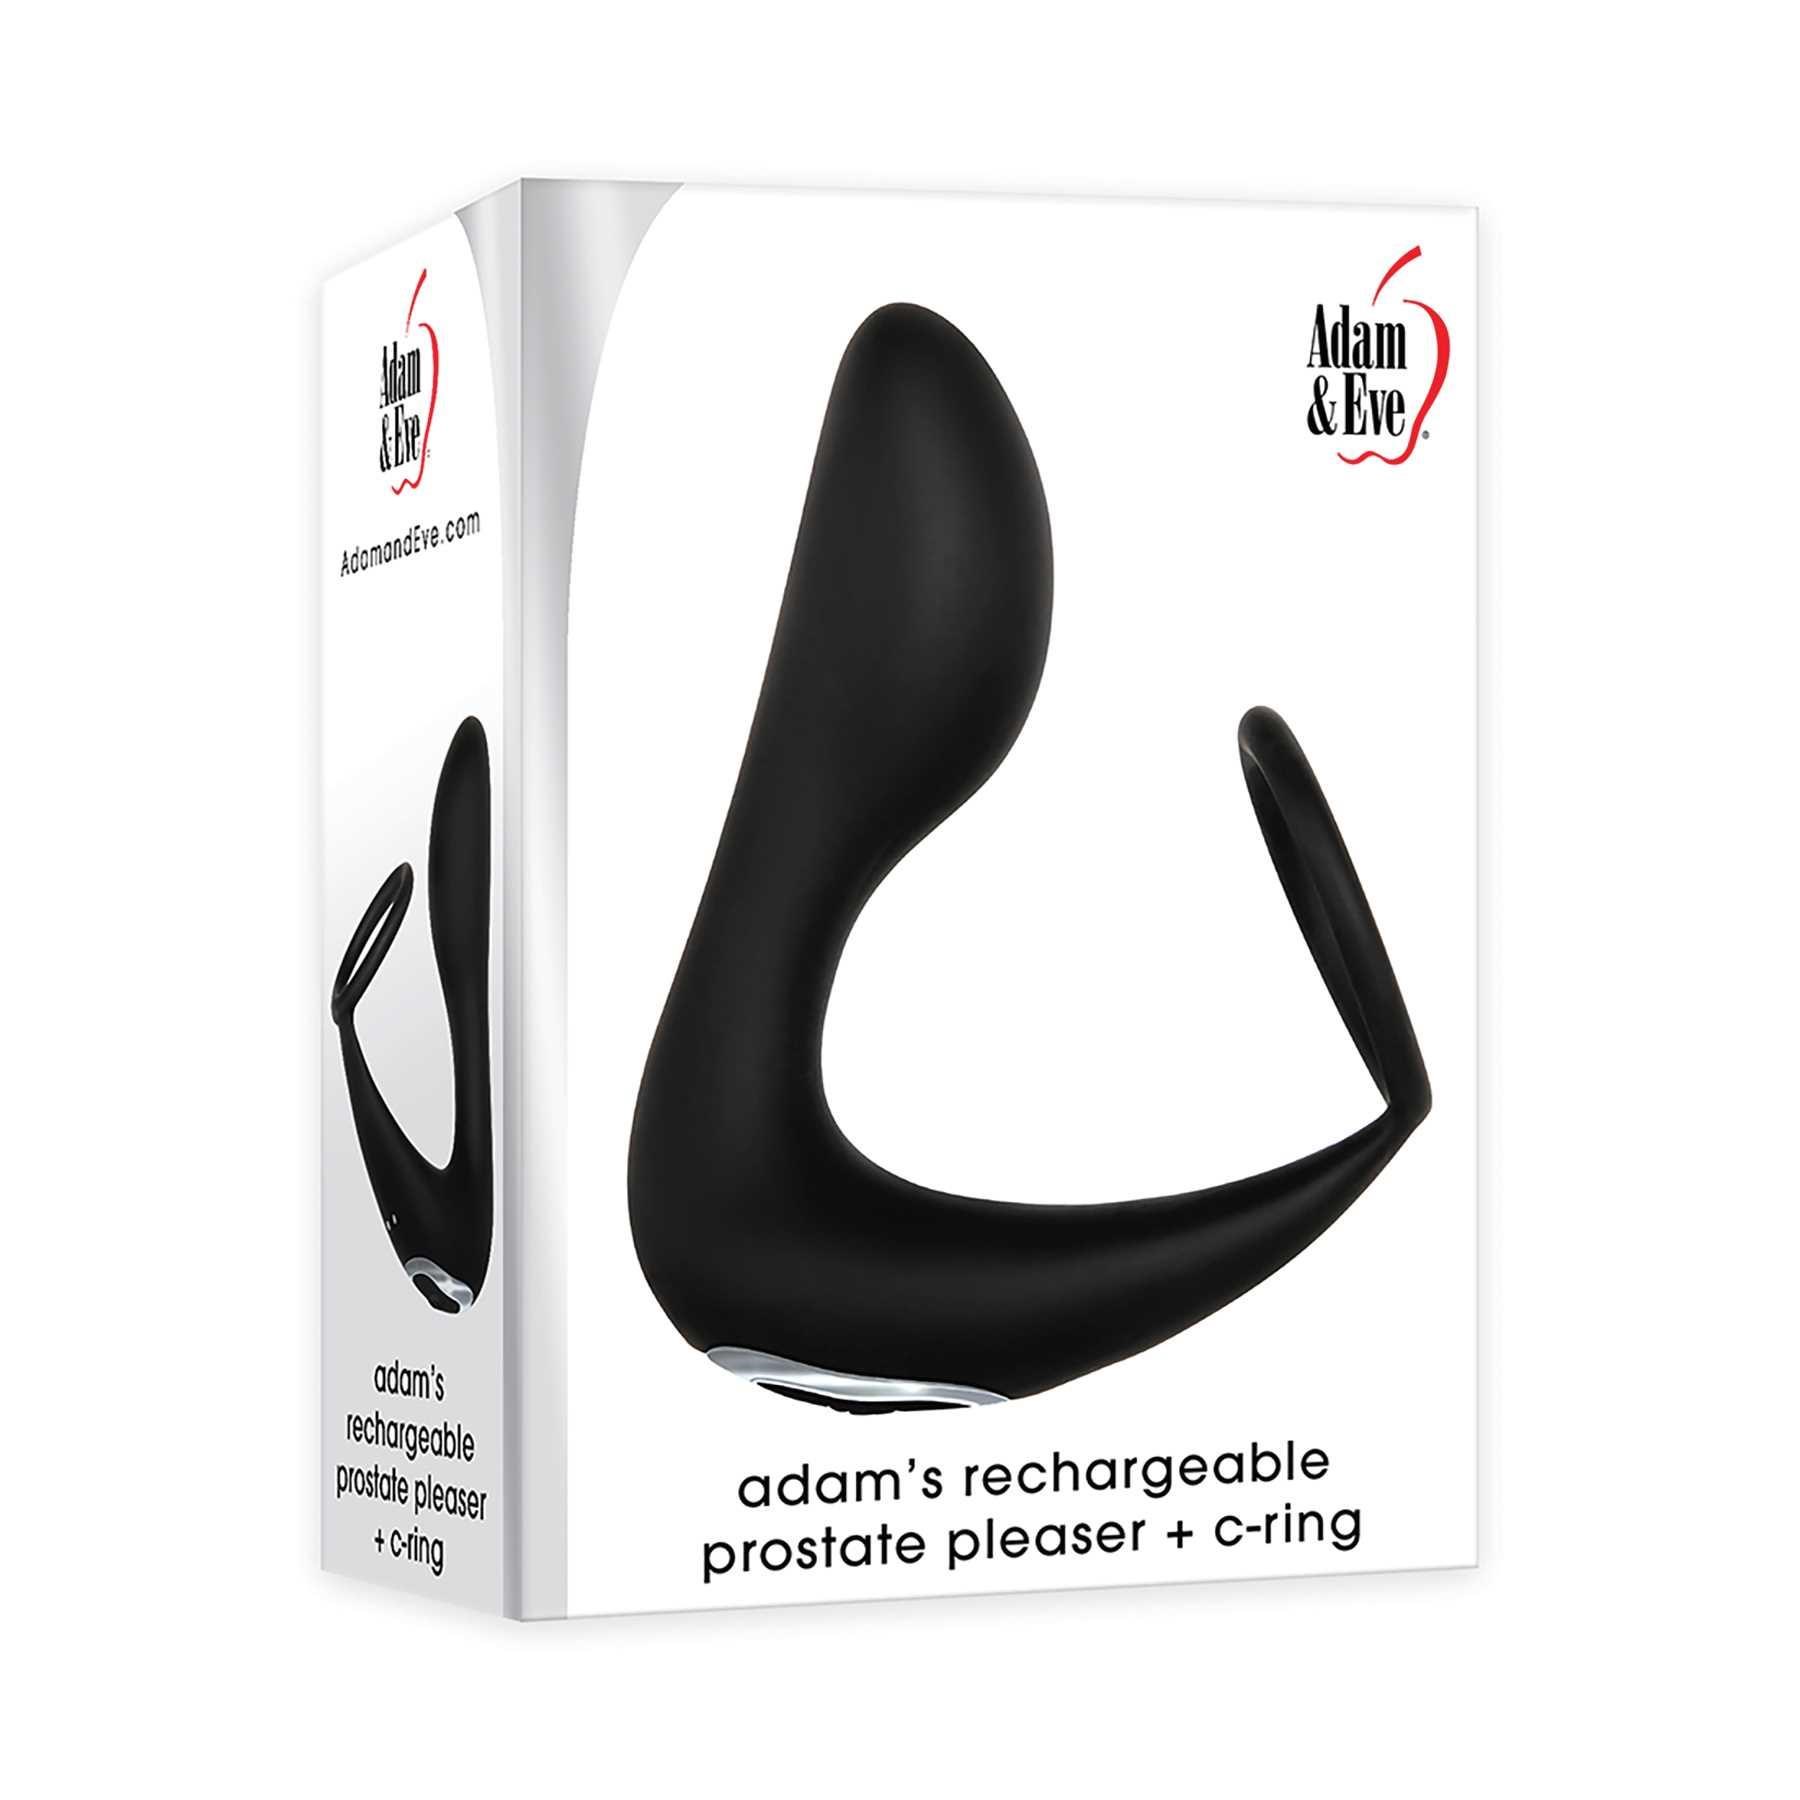 adam's rechargeable prostate pleaser + C-Ring box packaging